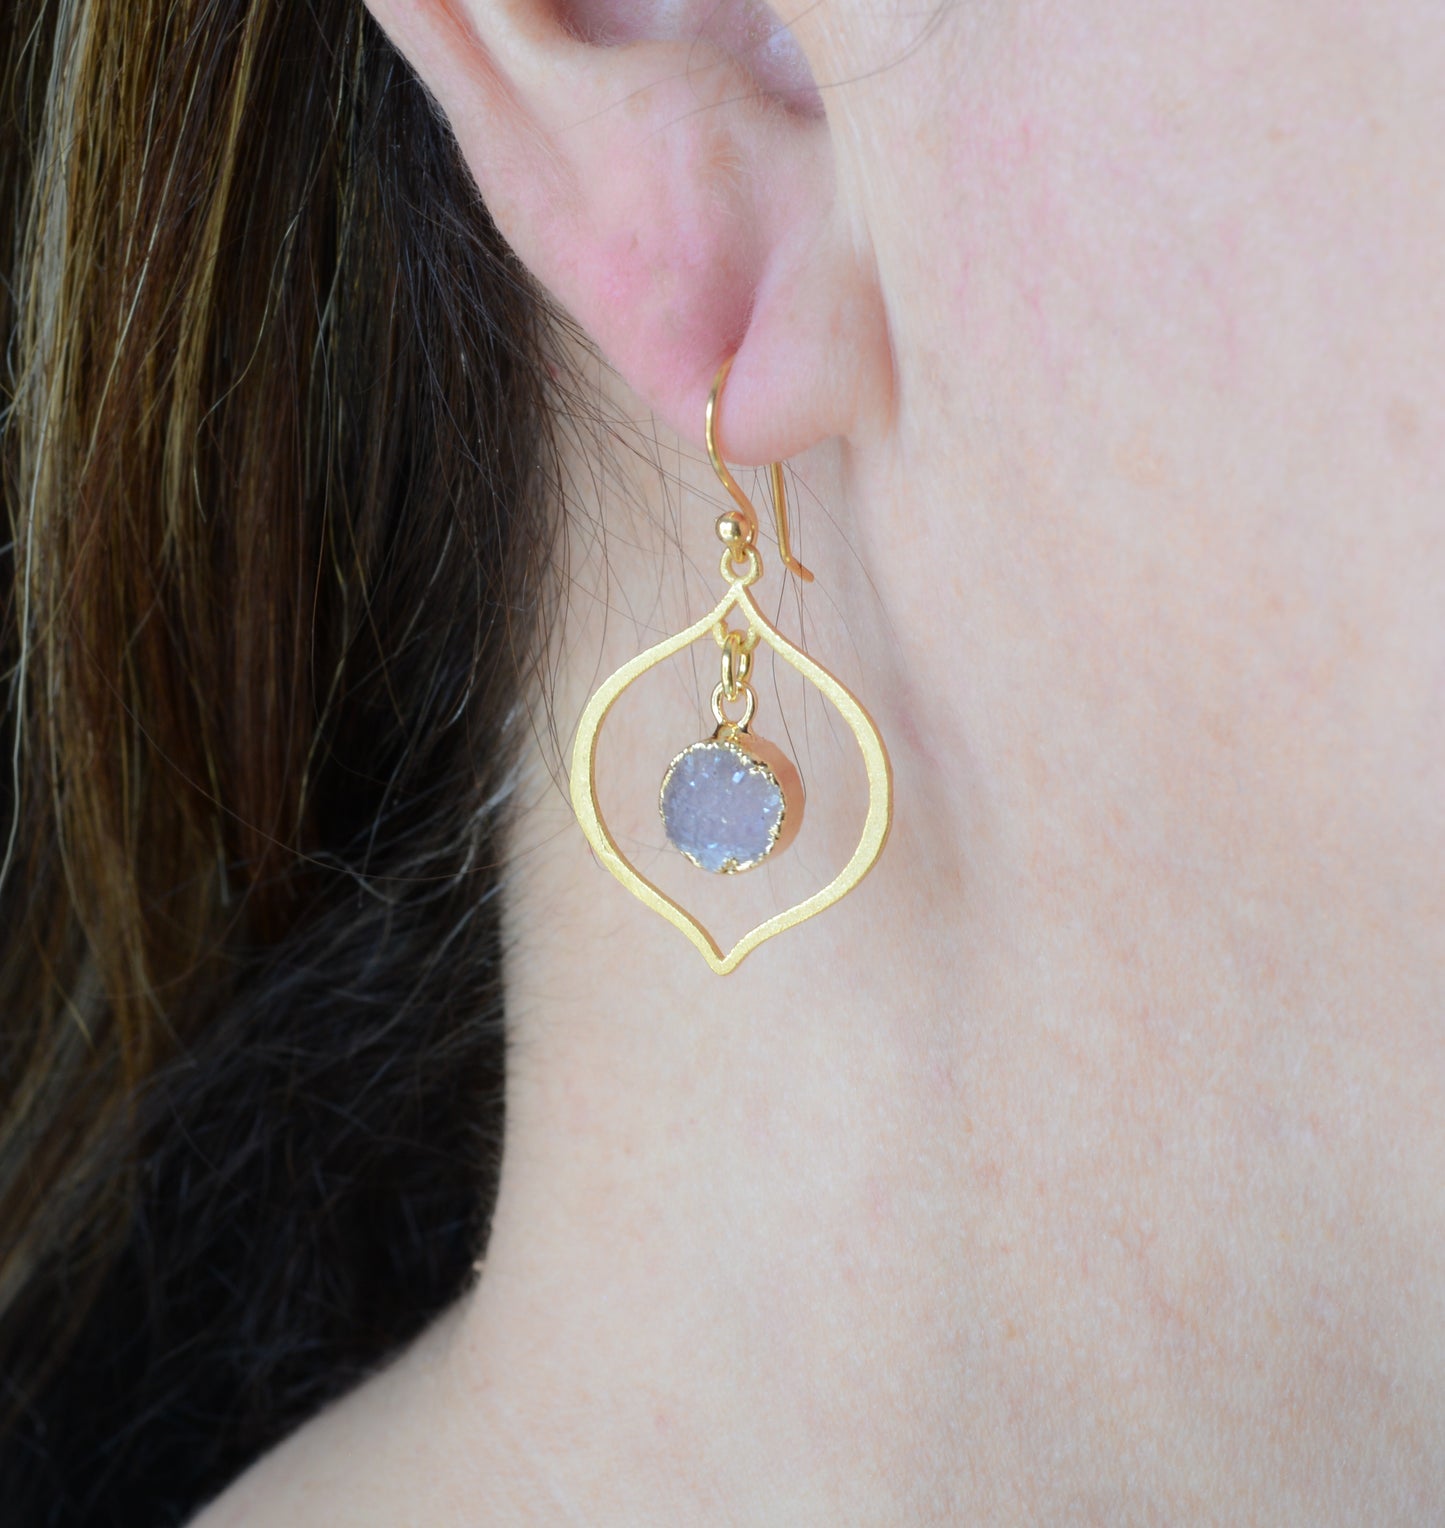 Gold lotus earrings with druzy stones